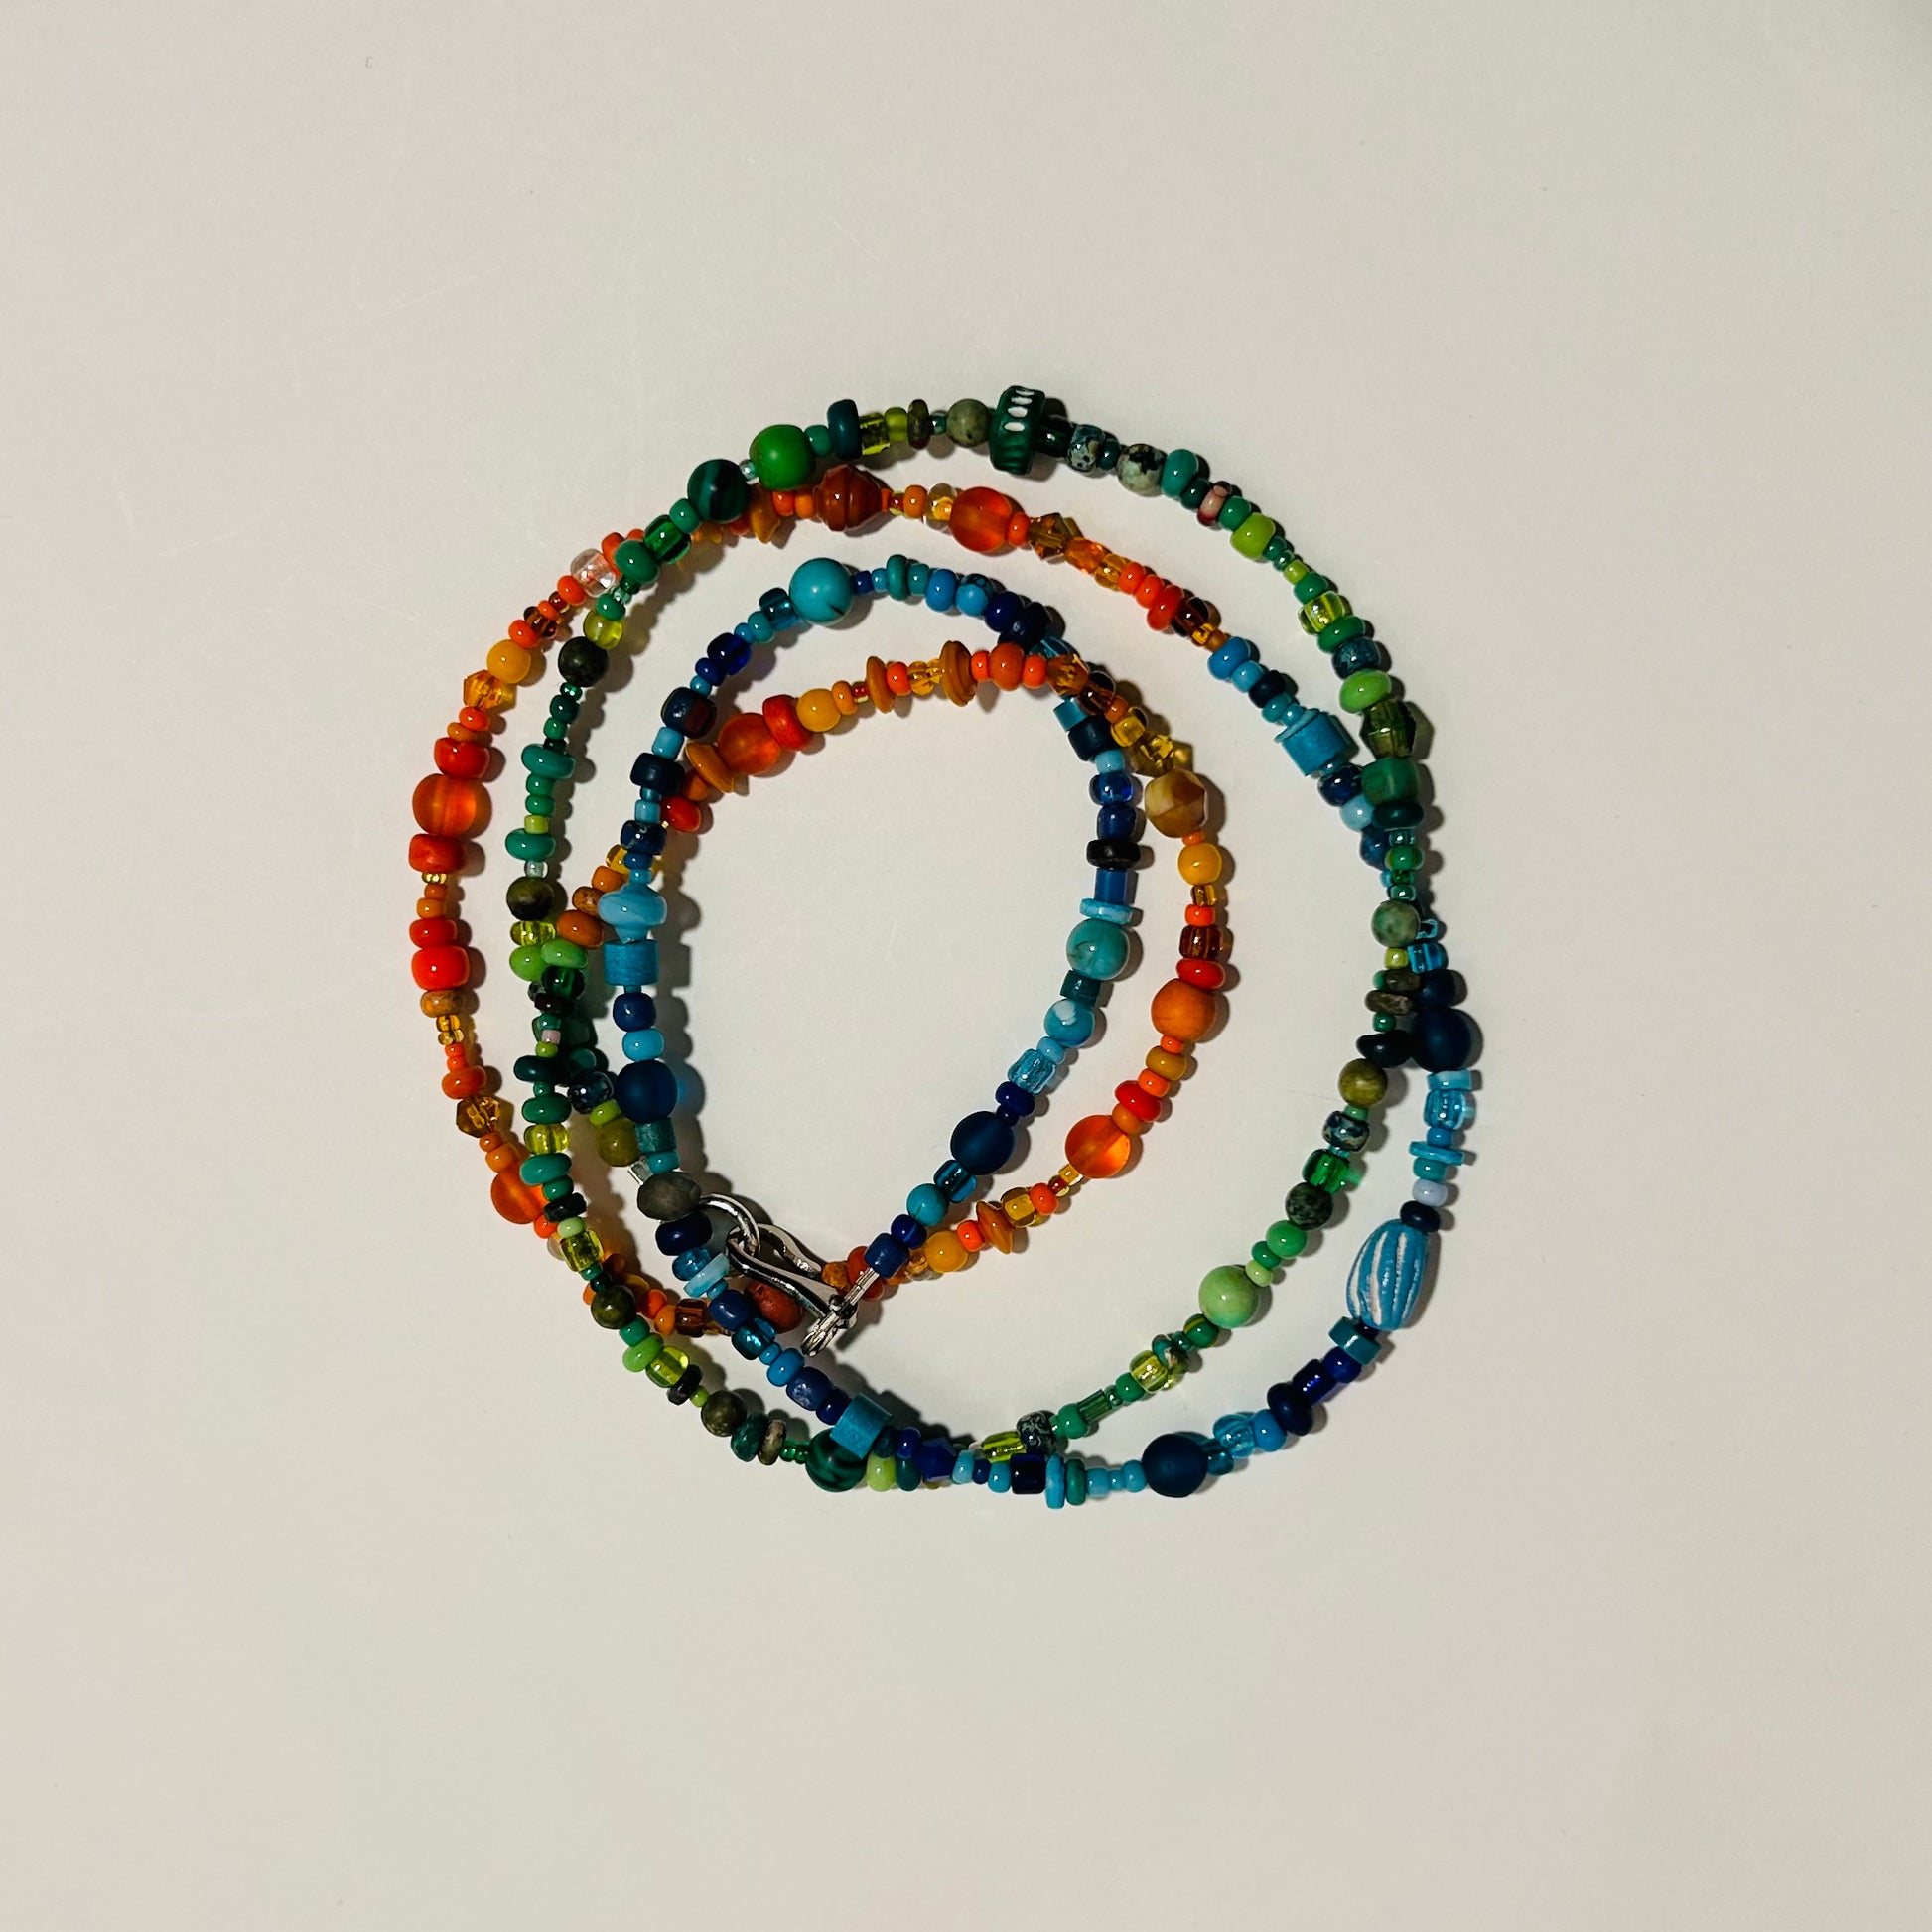 A long beaded necklace displayed laying on a surface, wound up to resemble bracelets. The necklace has 3 sections of various beads- orange, blue, & green. 